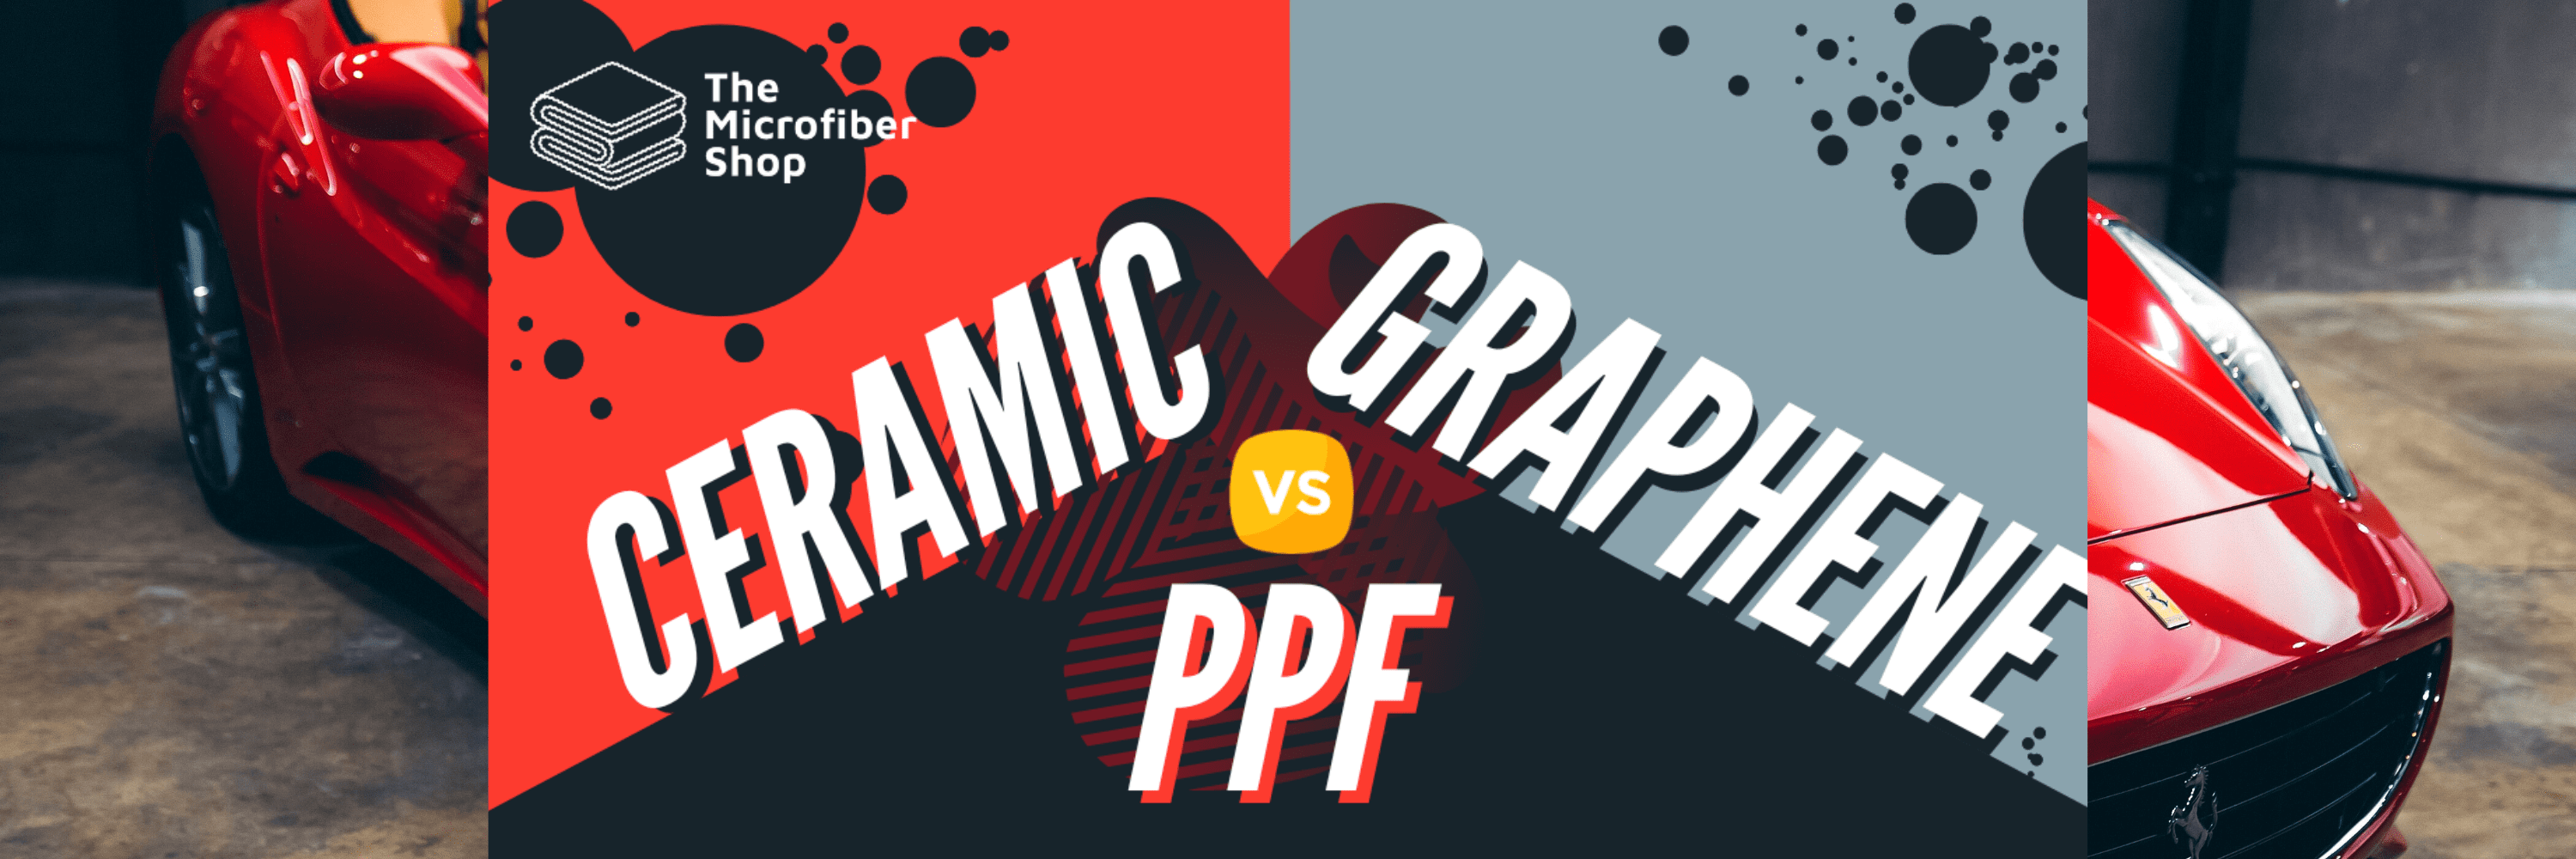 Paint Protection Film (PPF) vs. Ceramic Coating - Which should you go for?